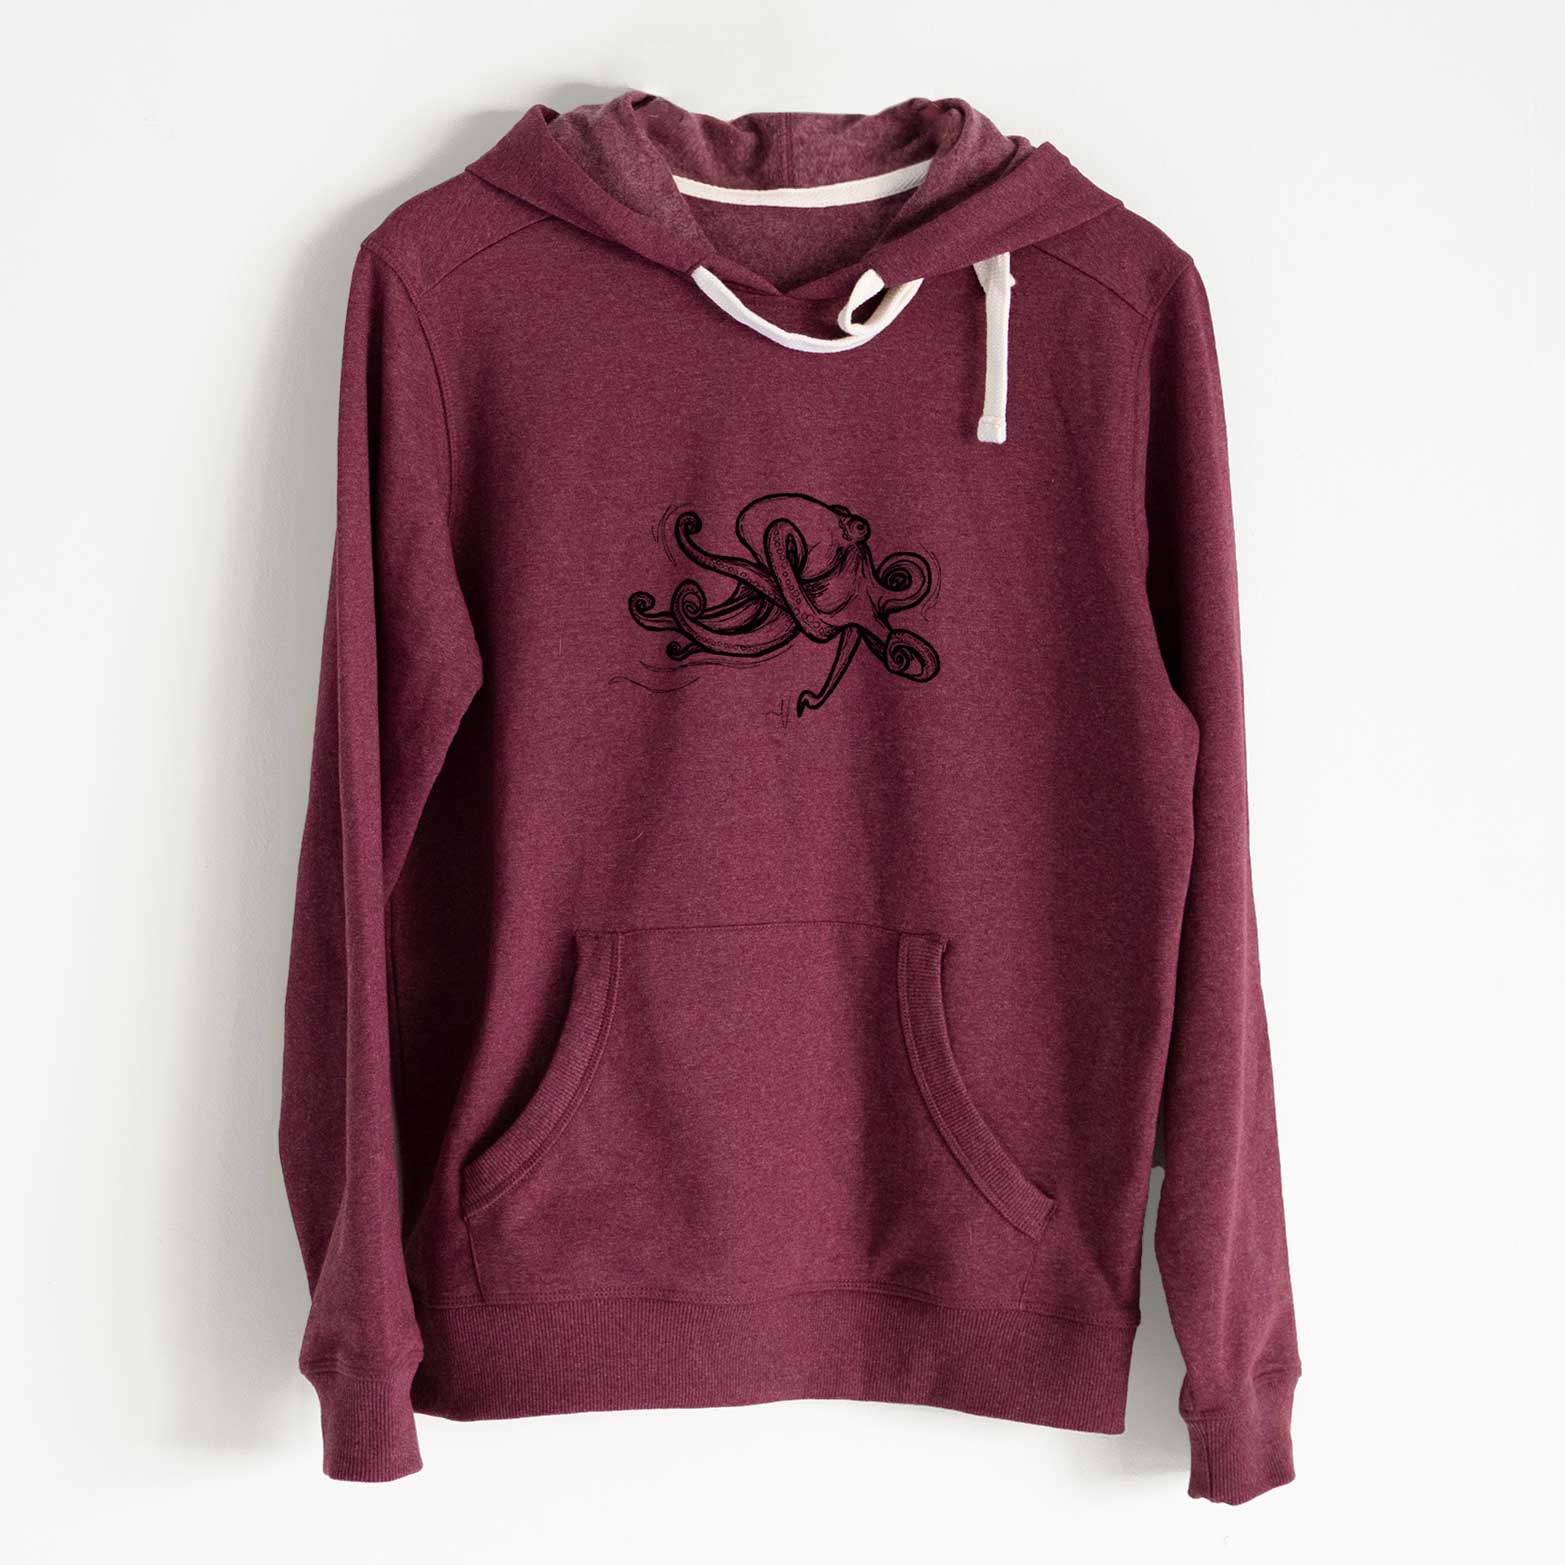 Giant Pacific Octopus Clothing  Octopus Shirts and Sweatshirts - Because  Tees